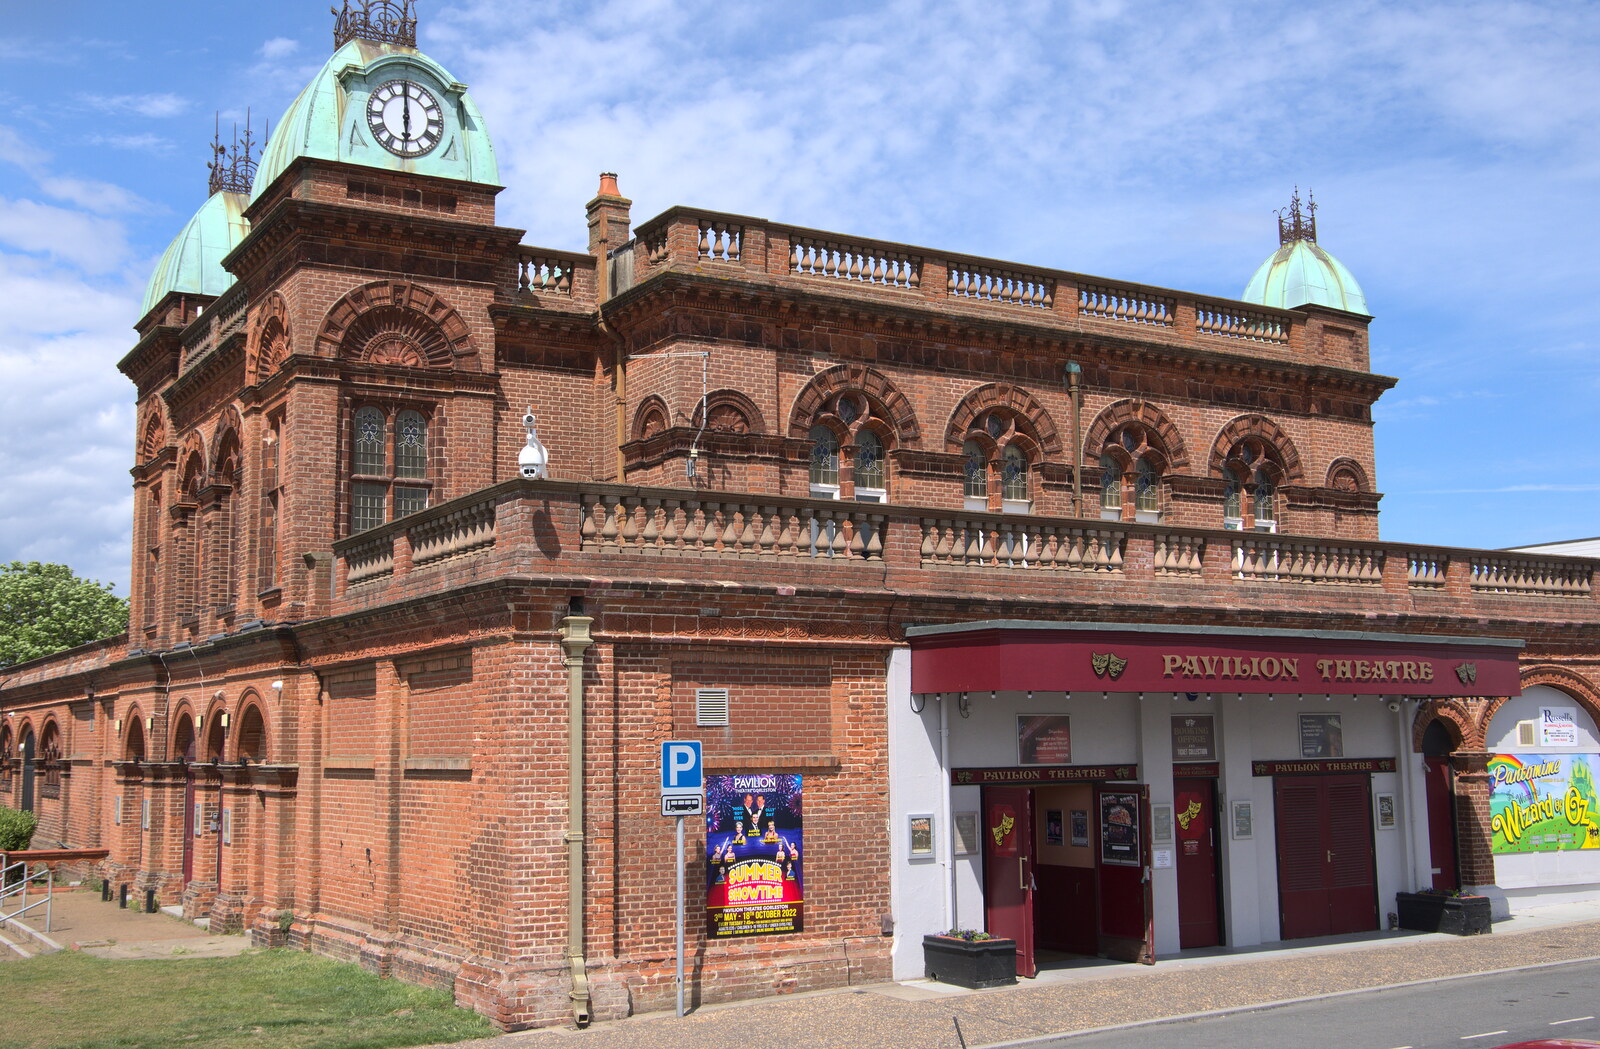 The very grand Gorleston Pavilion Theater from Faded Seaside Glamour: A Weekend in Great Yarmouth, Norfolk - 29th May 2022